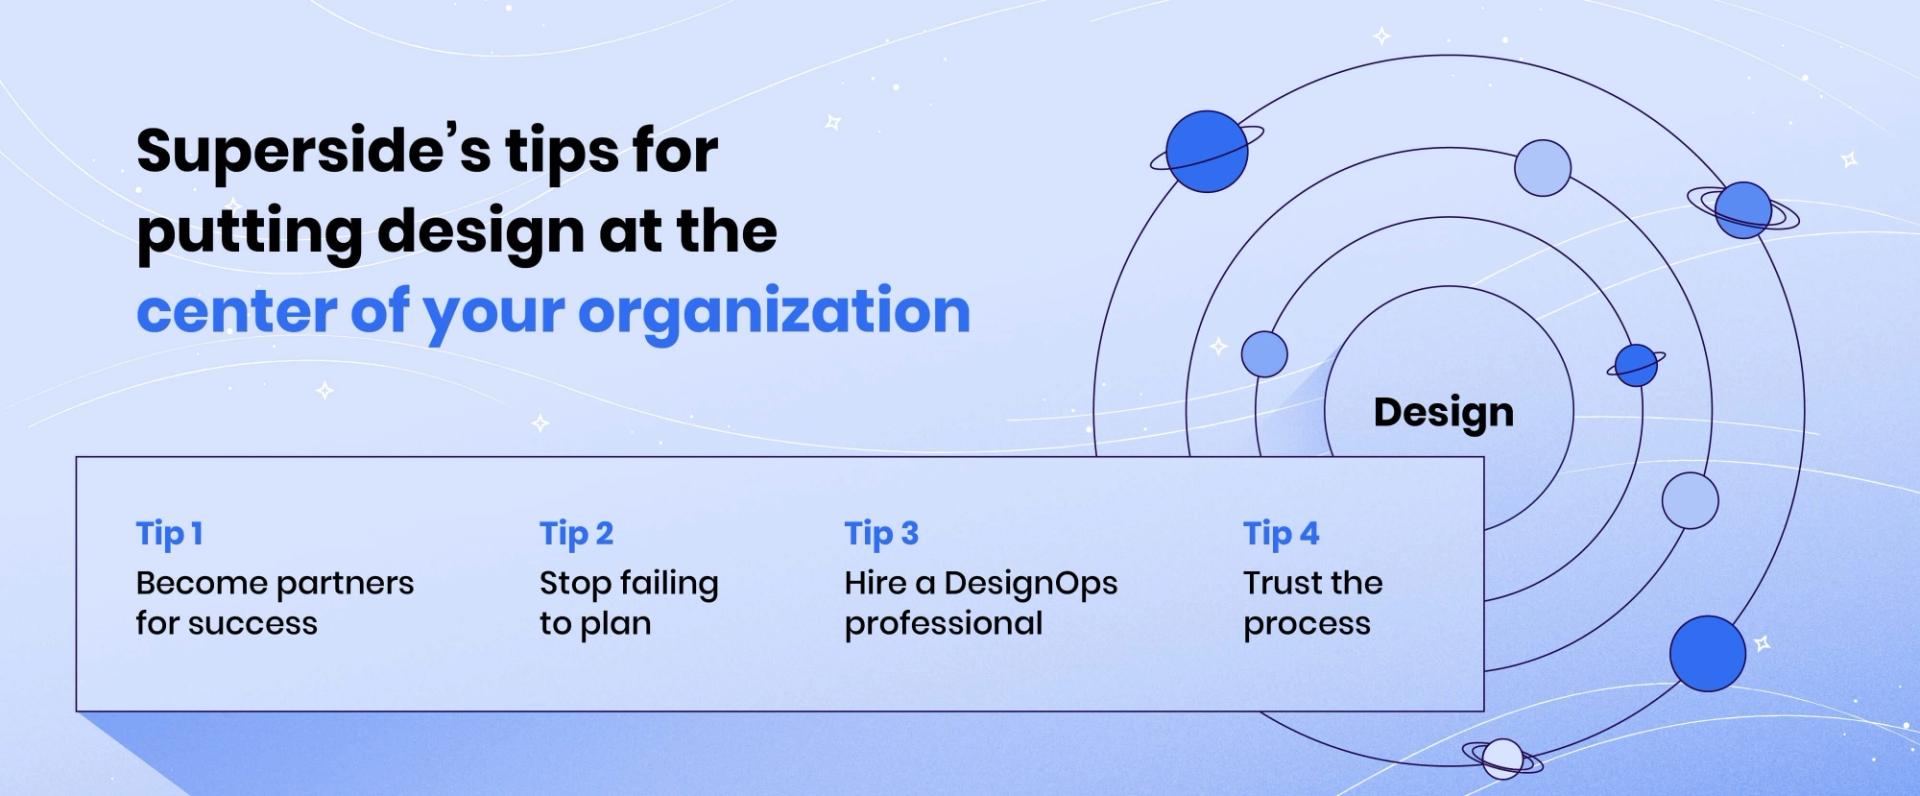 Tips for putting design at the center of your organization